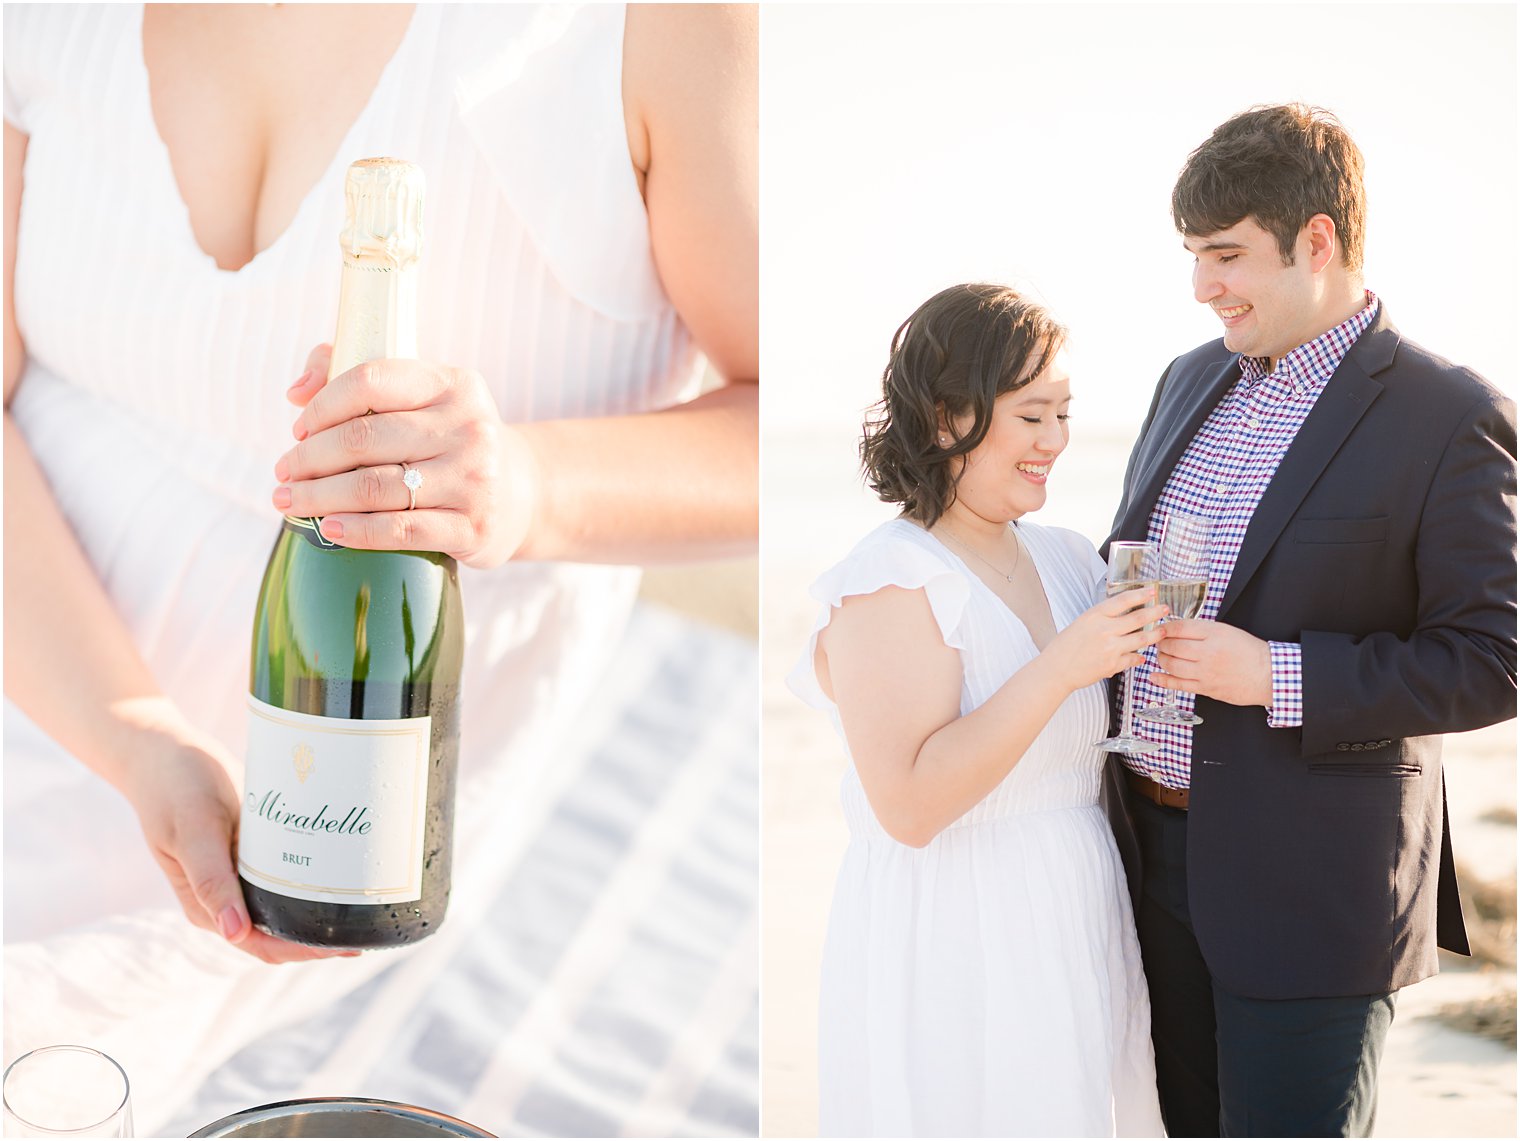 couple toasts Champagne while bride shows off ring 